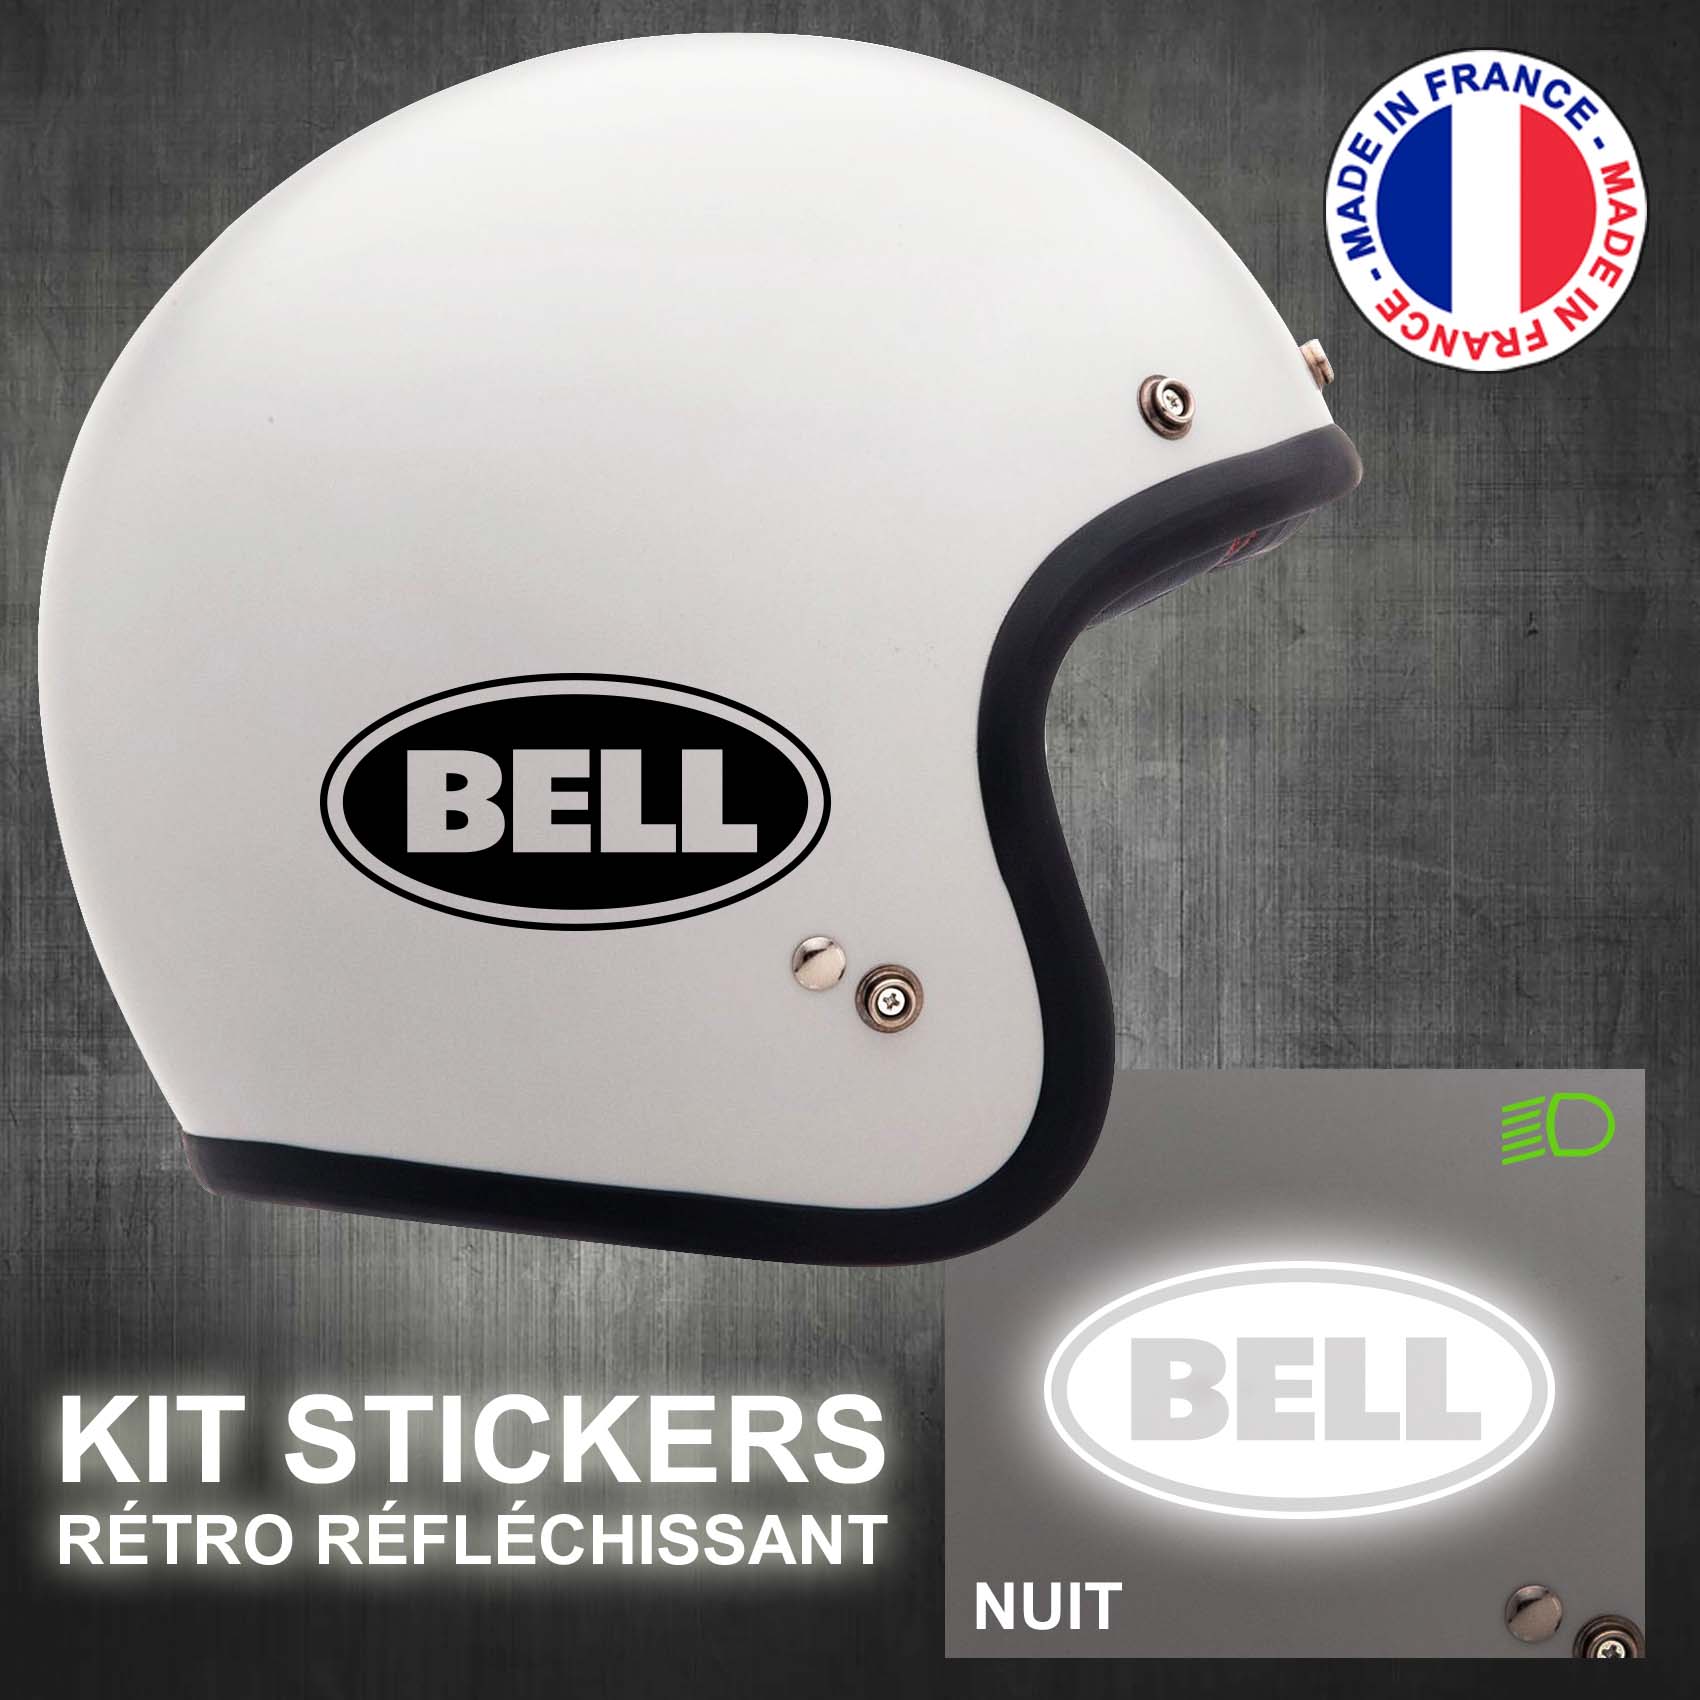 stickers-casque-moto-bell-ref1-retro-reflechissant-autocollant-blanc-moto-velo-tuning-racing-route-sticker-casques-adhesif-scooter-nuit-securite-decals-personnalise-personnalisable-min